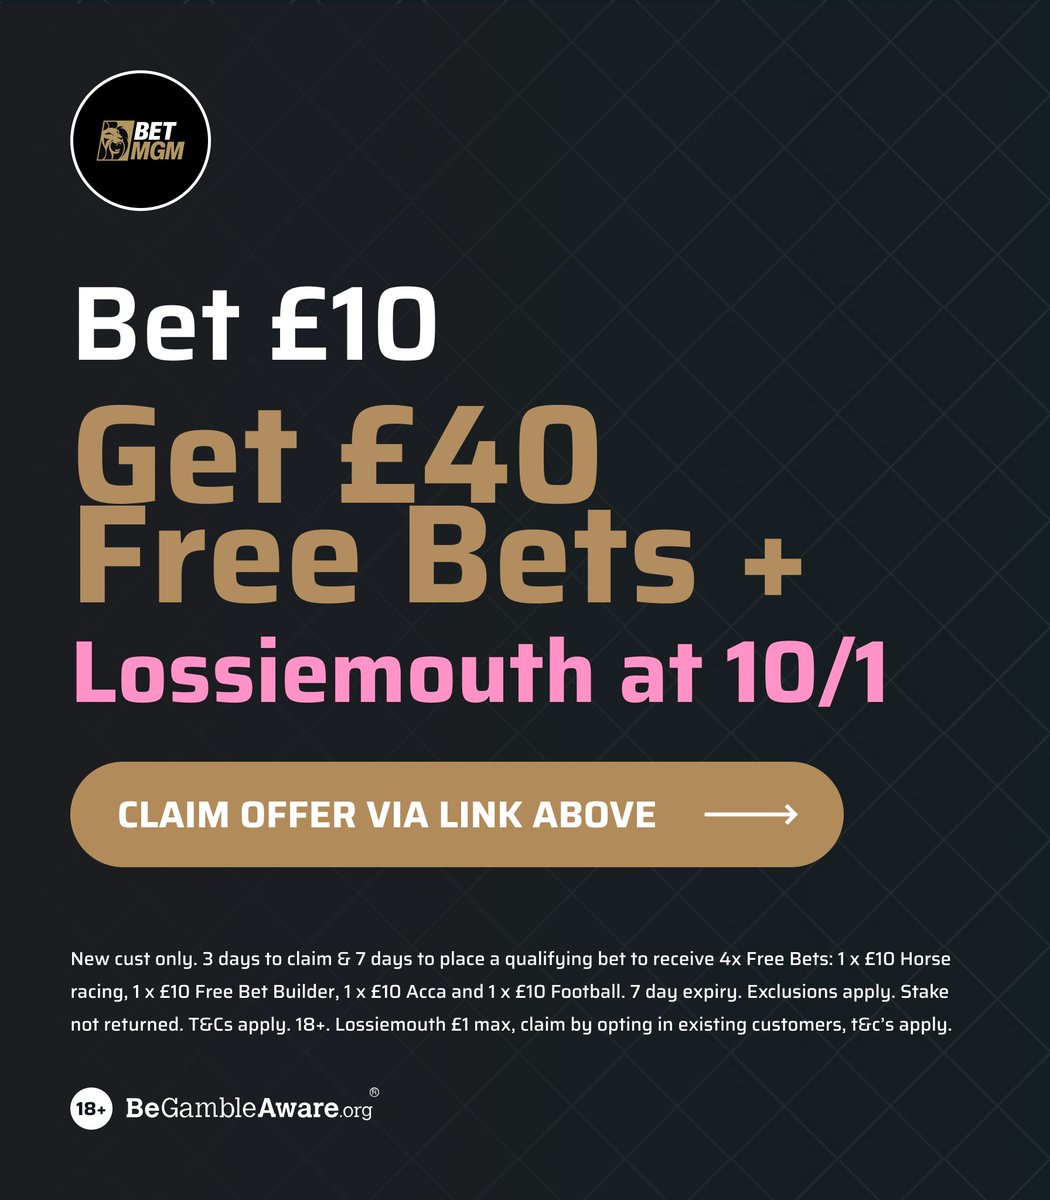 HUGE BETMGM OFFER 🔥 Get £40 IN FREE BETS for tomorrow and get LOSSIEMOUTH TO WIN AT A HUGE 10/1! 🩷💚 Claim HERE: twebet.link/BetMGMB10G40 #AD | 18+ | BeGambleAware | New Customer Offer | T&C's Apply